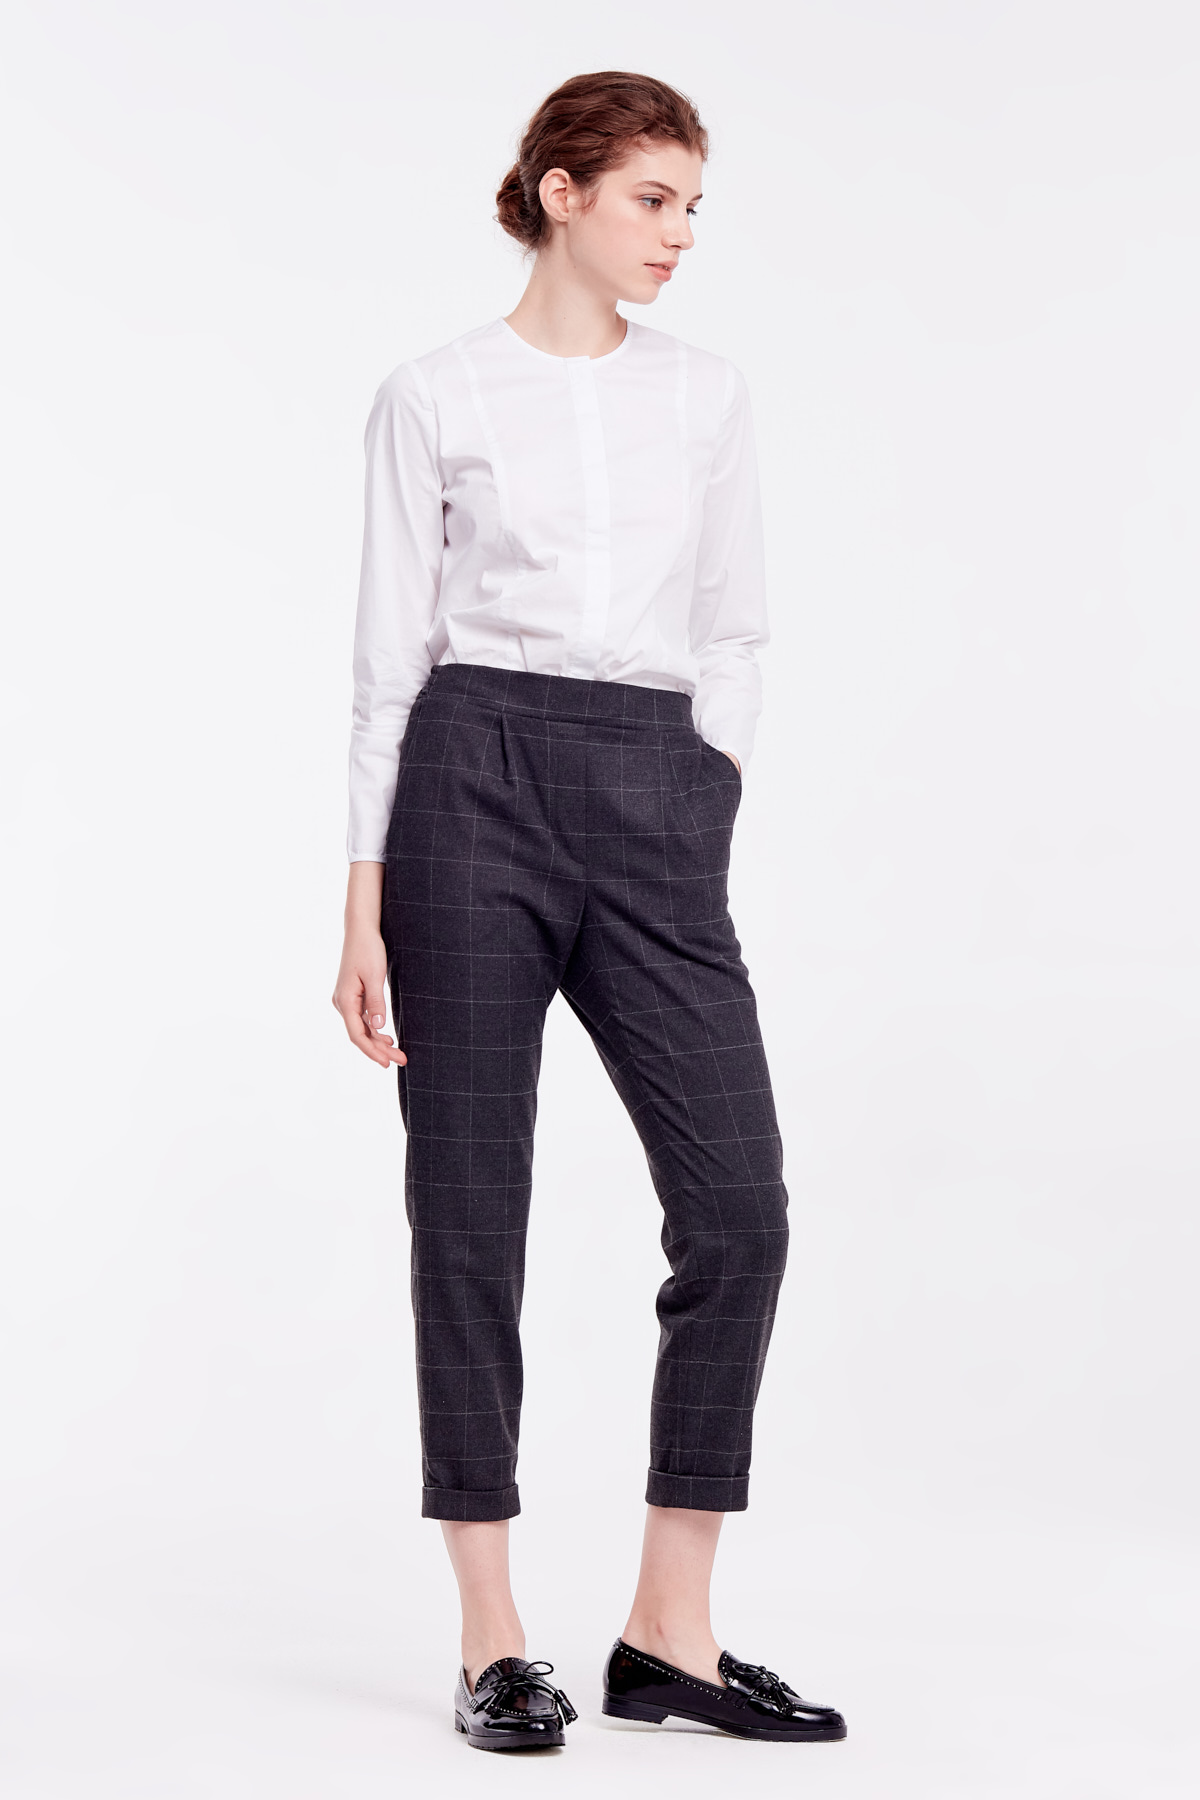 Loose grey checkered pants with cuffs, photo 8